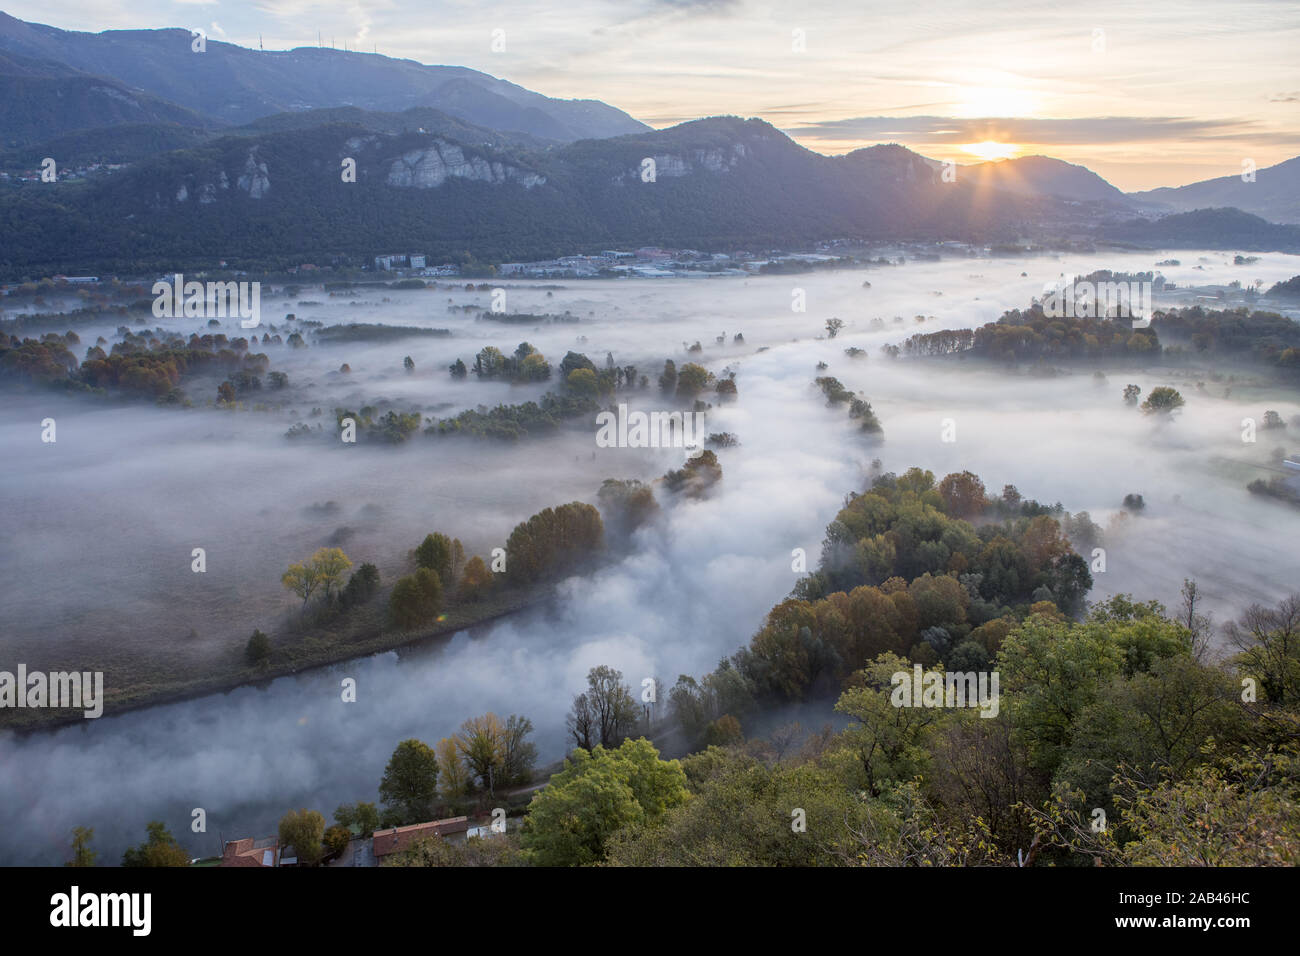 Adda river valley in the fog, Airuno, Lombardy, Italy Stock Photo